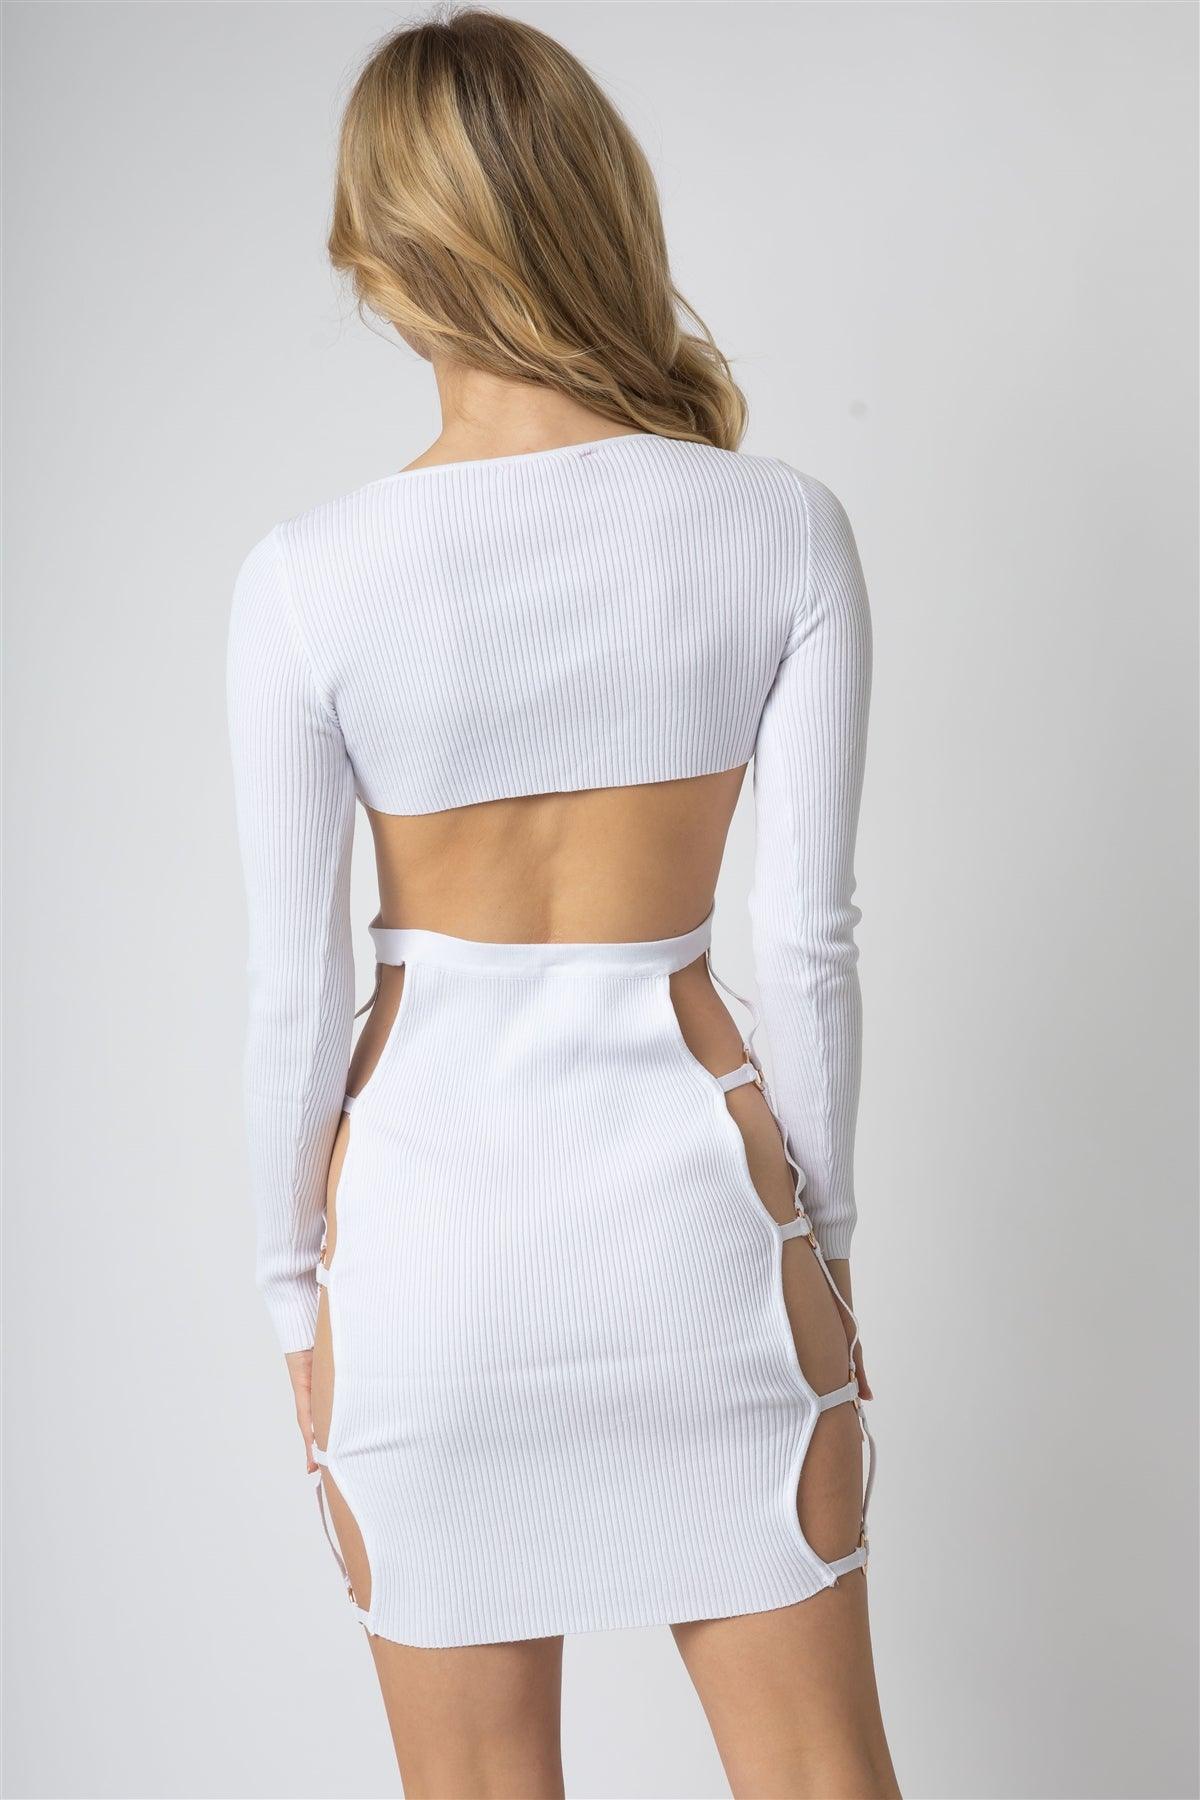 White  Knit Ribbed Side Cut-Out With Gold Tone Accent Ring Open Back Mini Dress /3-2-1